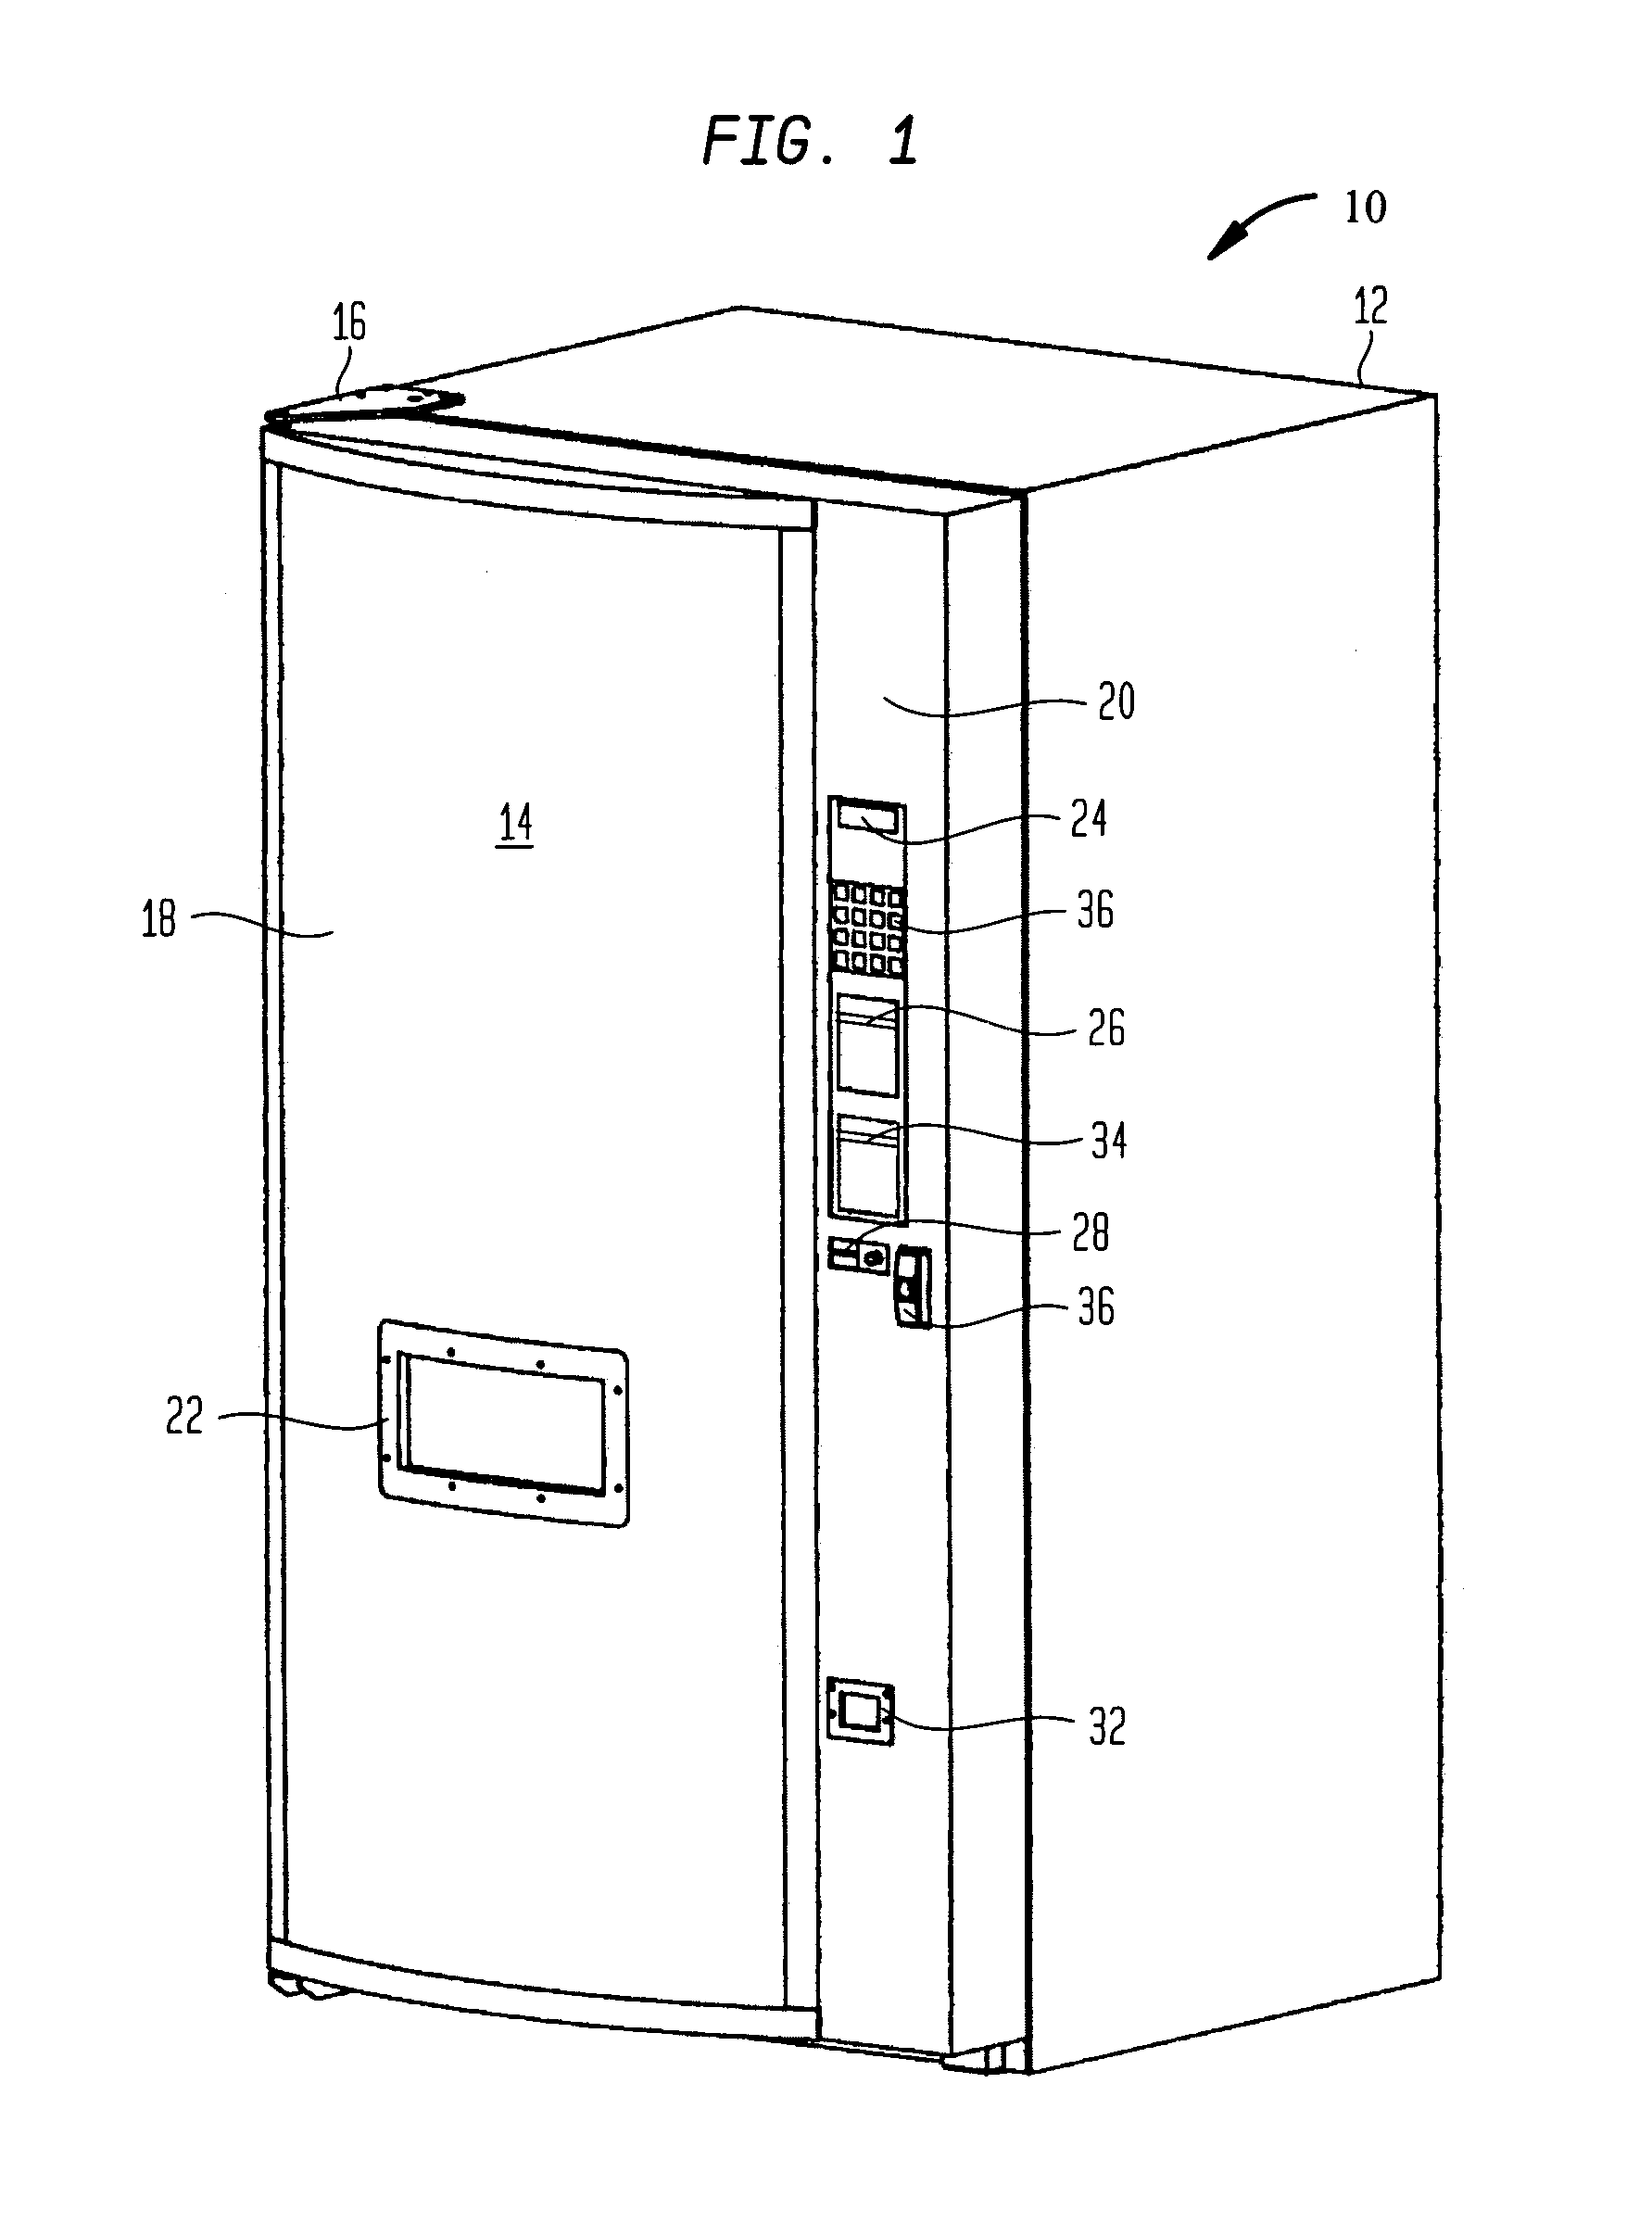 Method and apparatus for including article identification in an article handling device